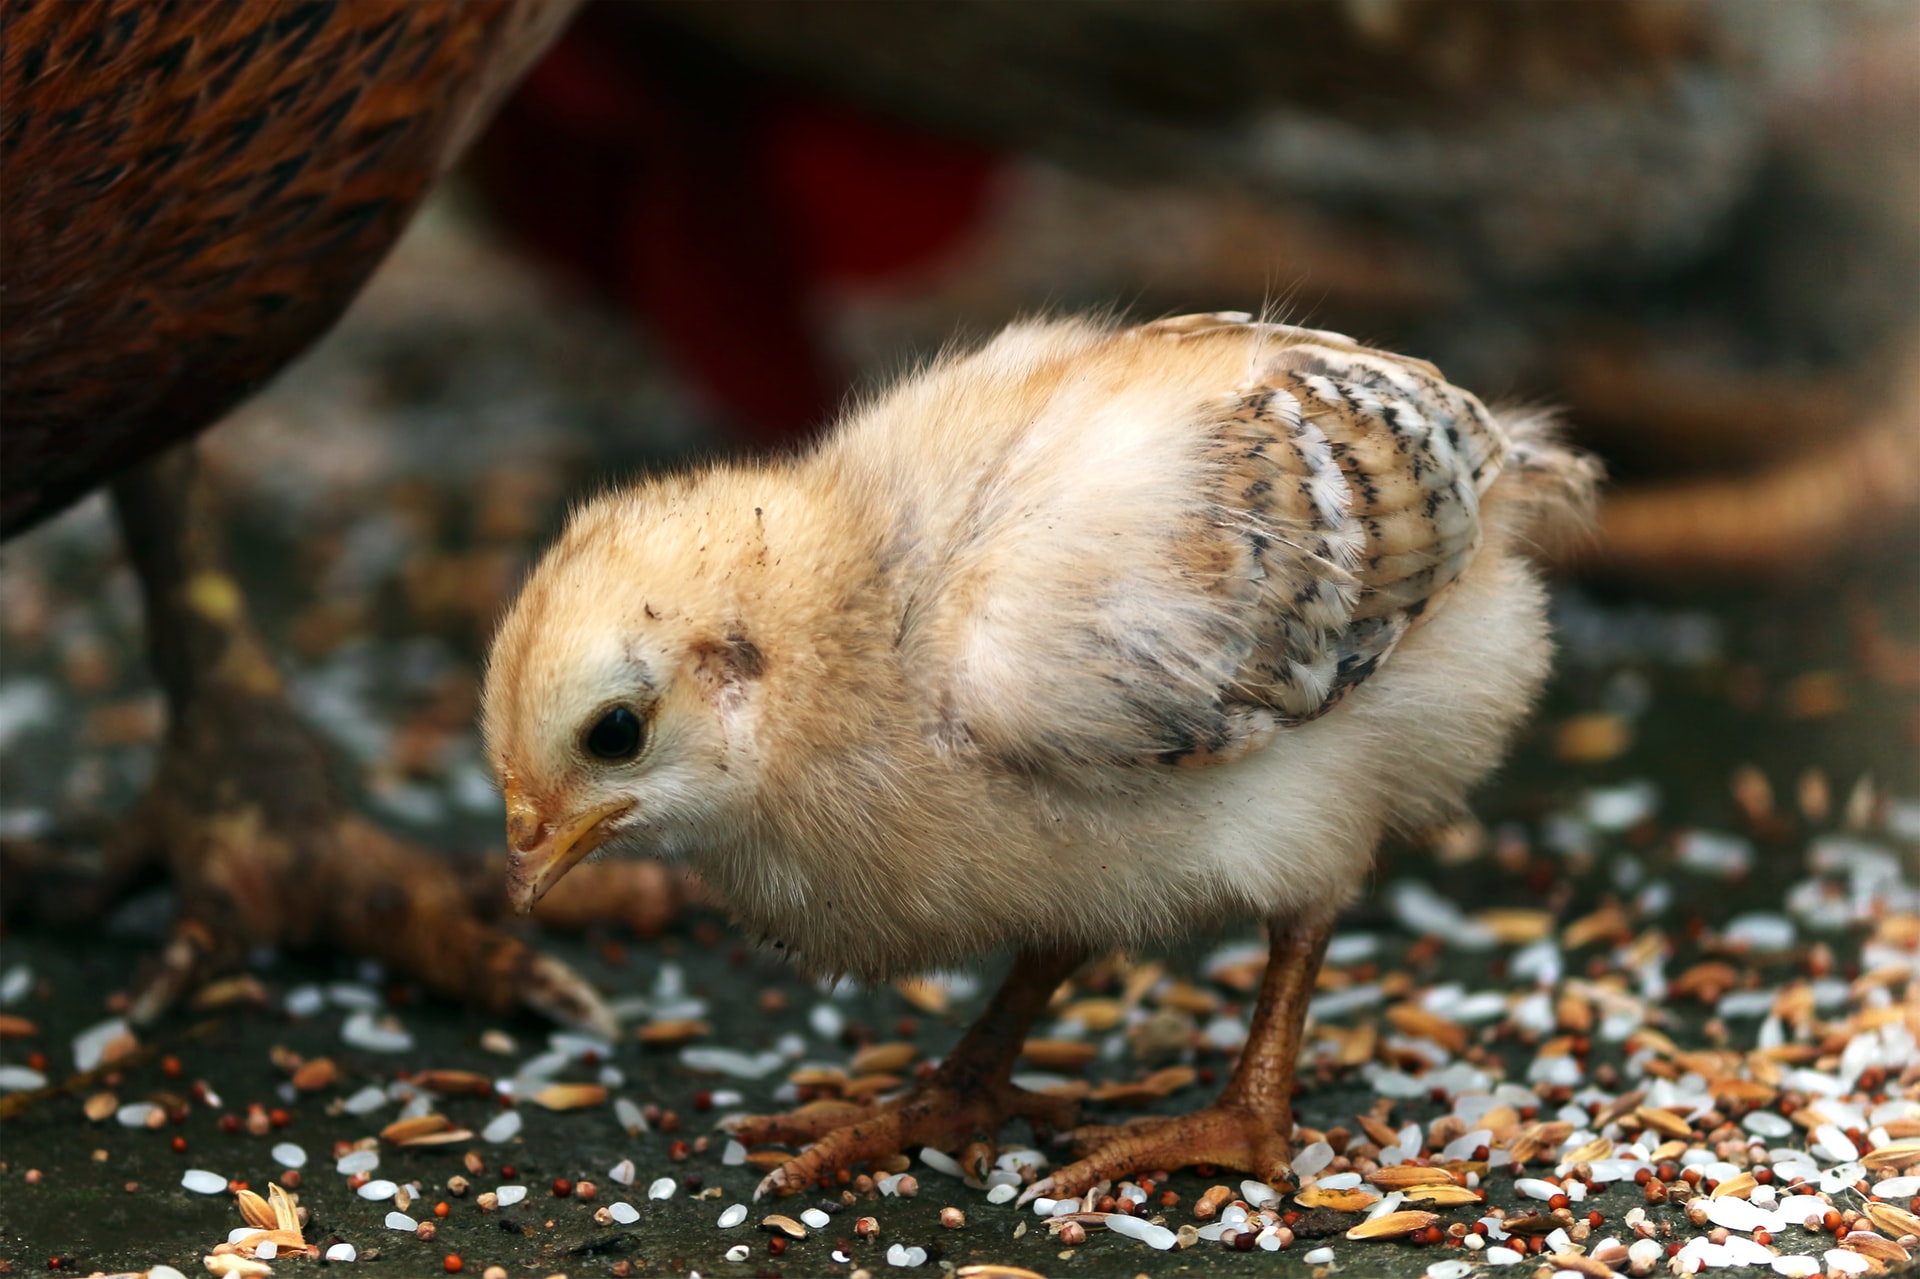 a fuzzy baby chick